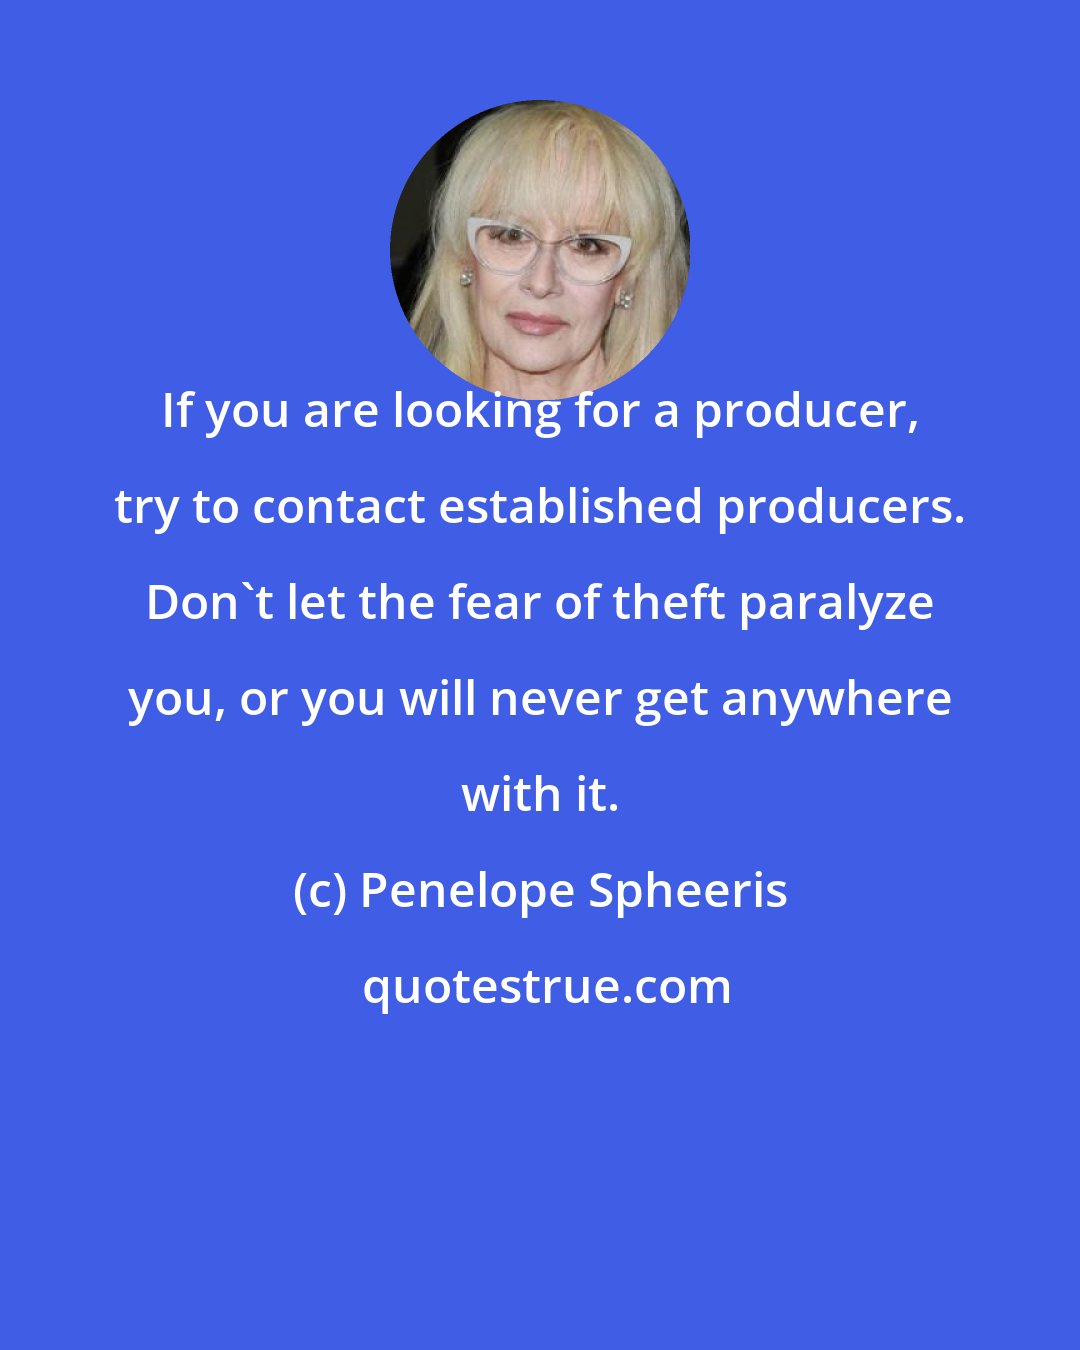 Penelope Spheeris: If you are looking for a producer, try to contact established producers. Don't let the fear of theft paralyze you, or you will never get anywhere with it.